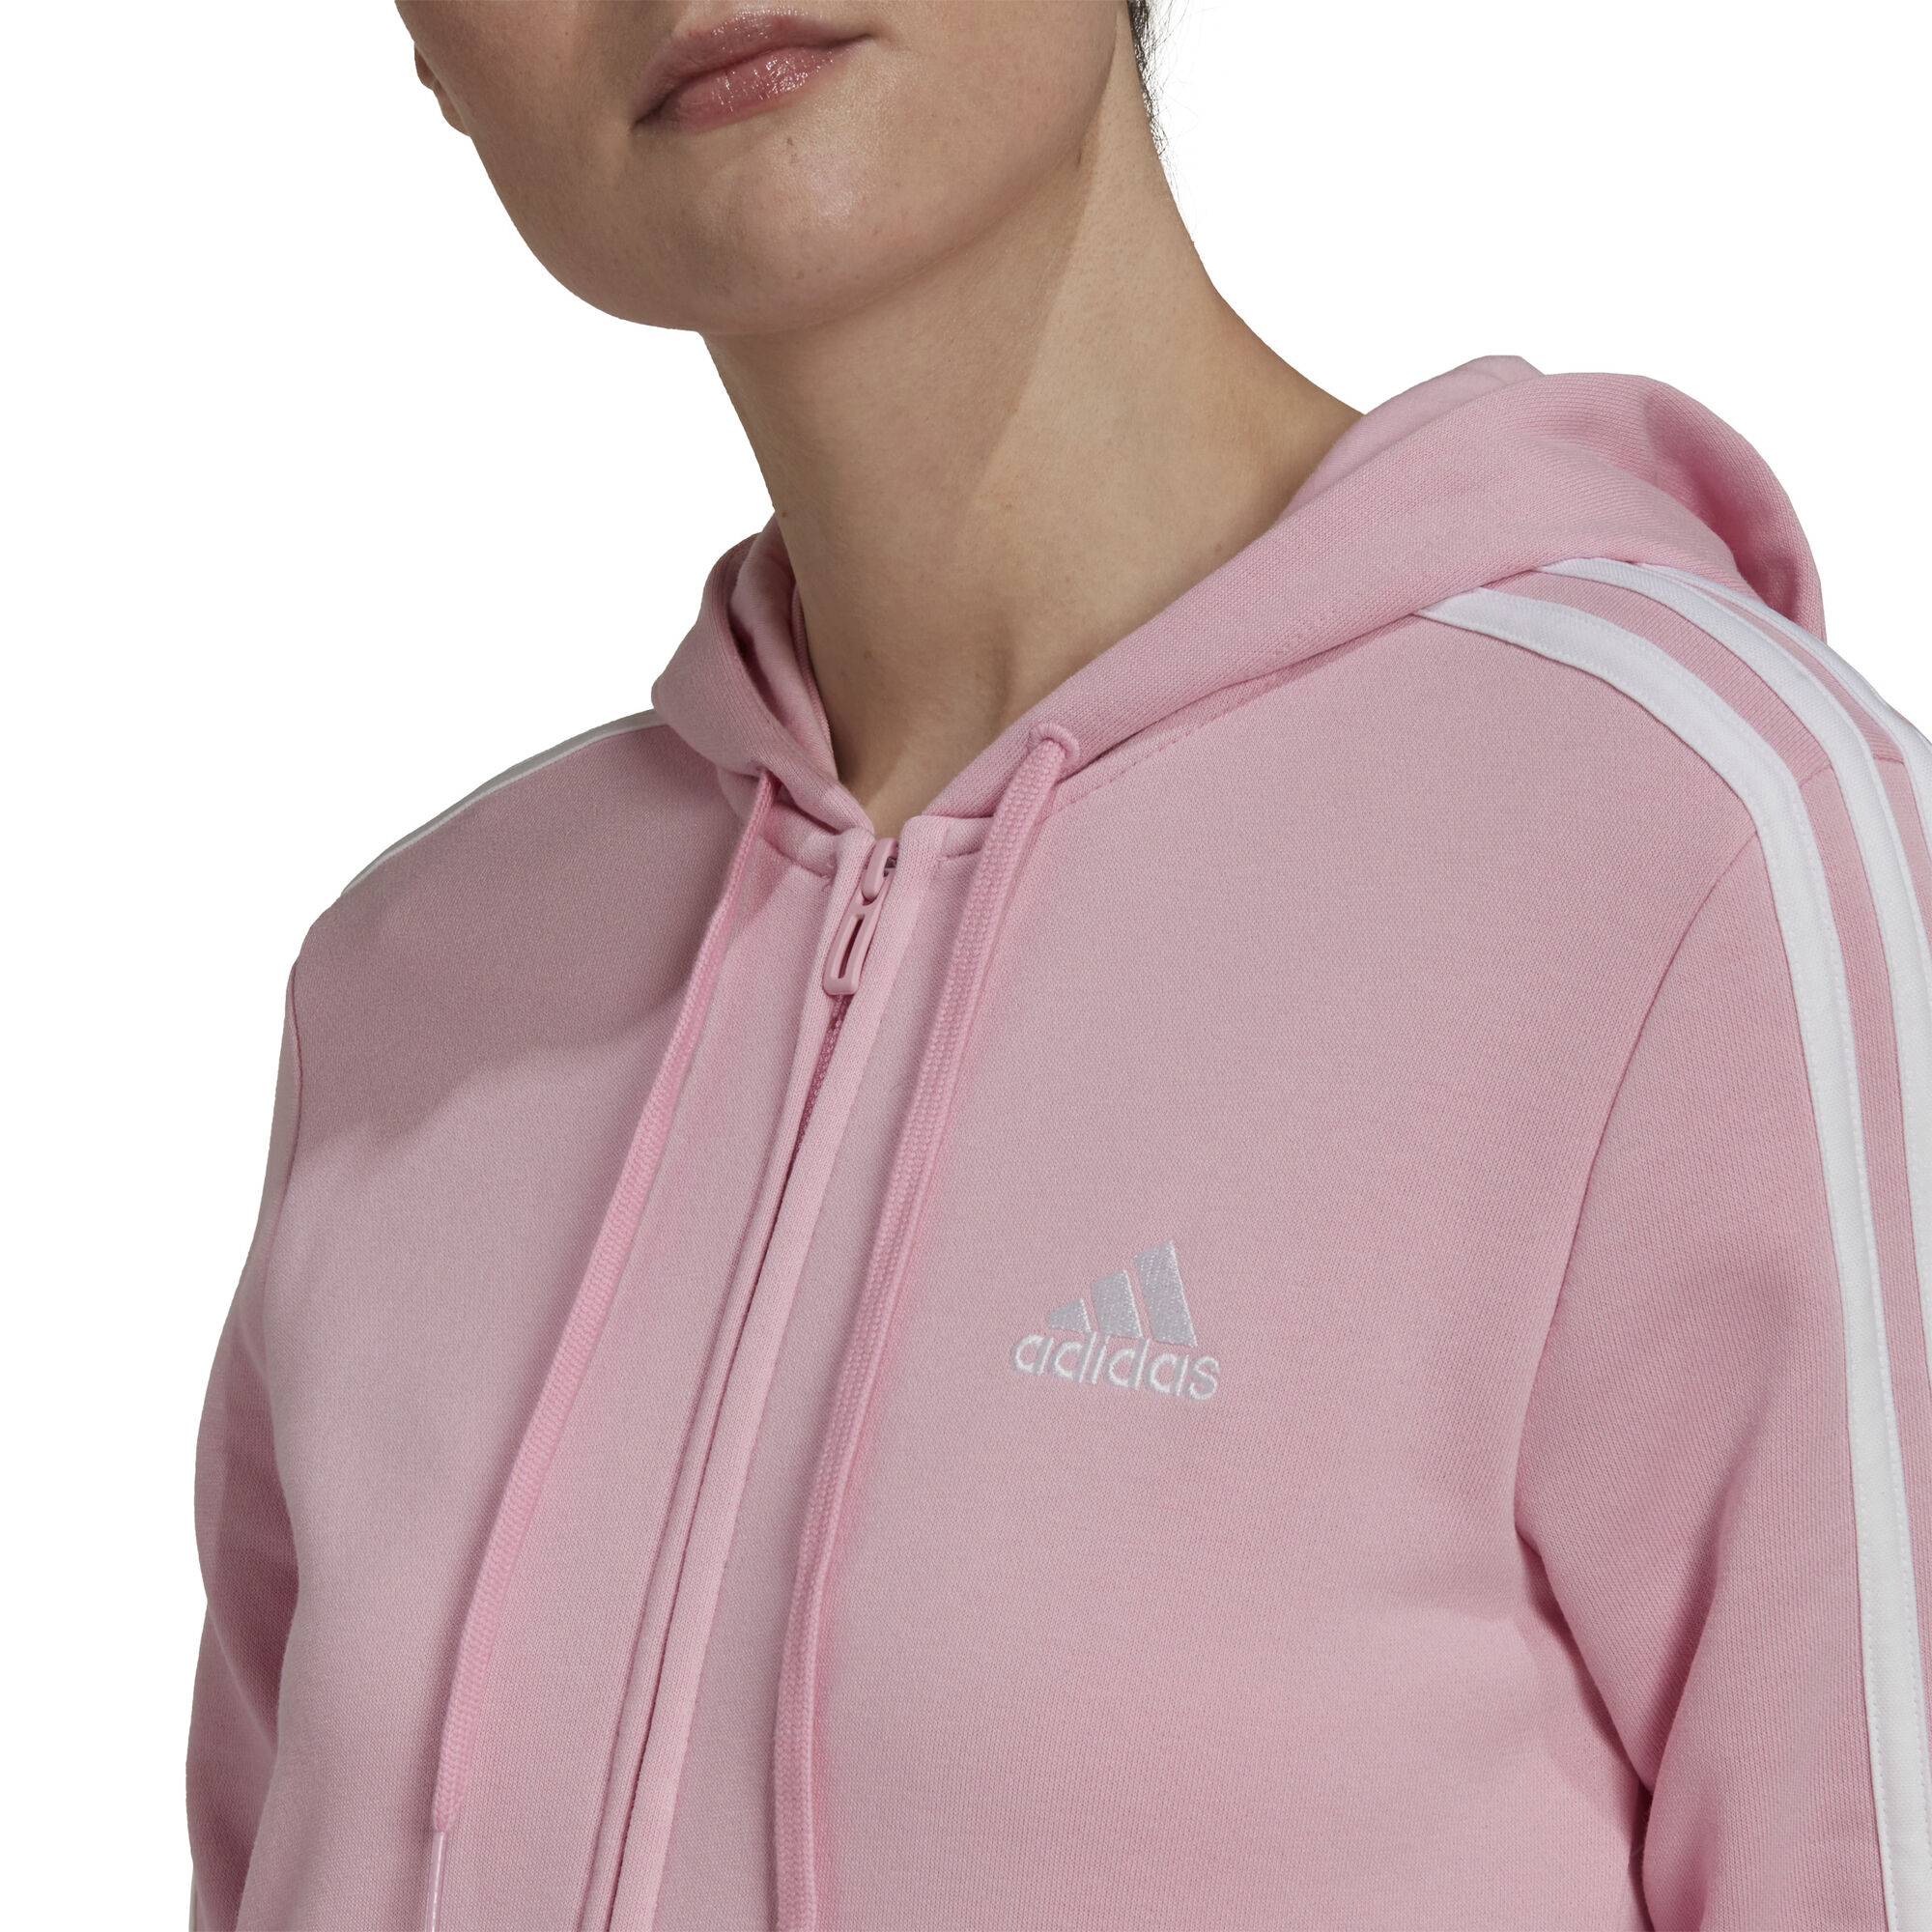 buy adidas 3 Stripes French Terry Women - Pink, White online | Tennis-Point